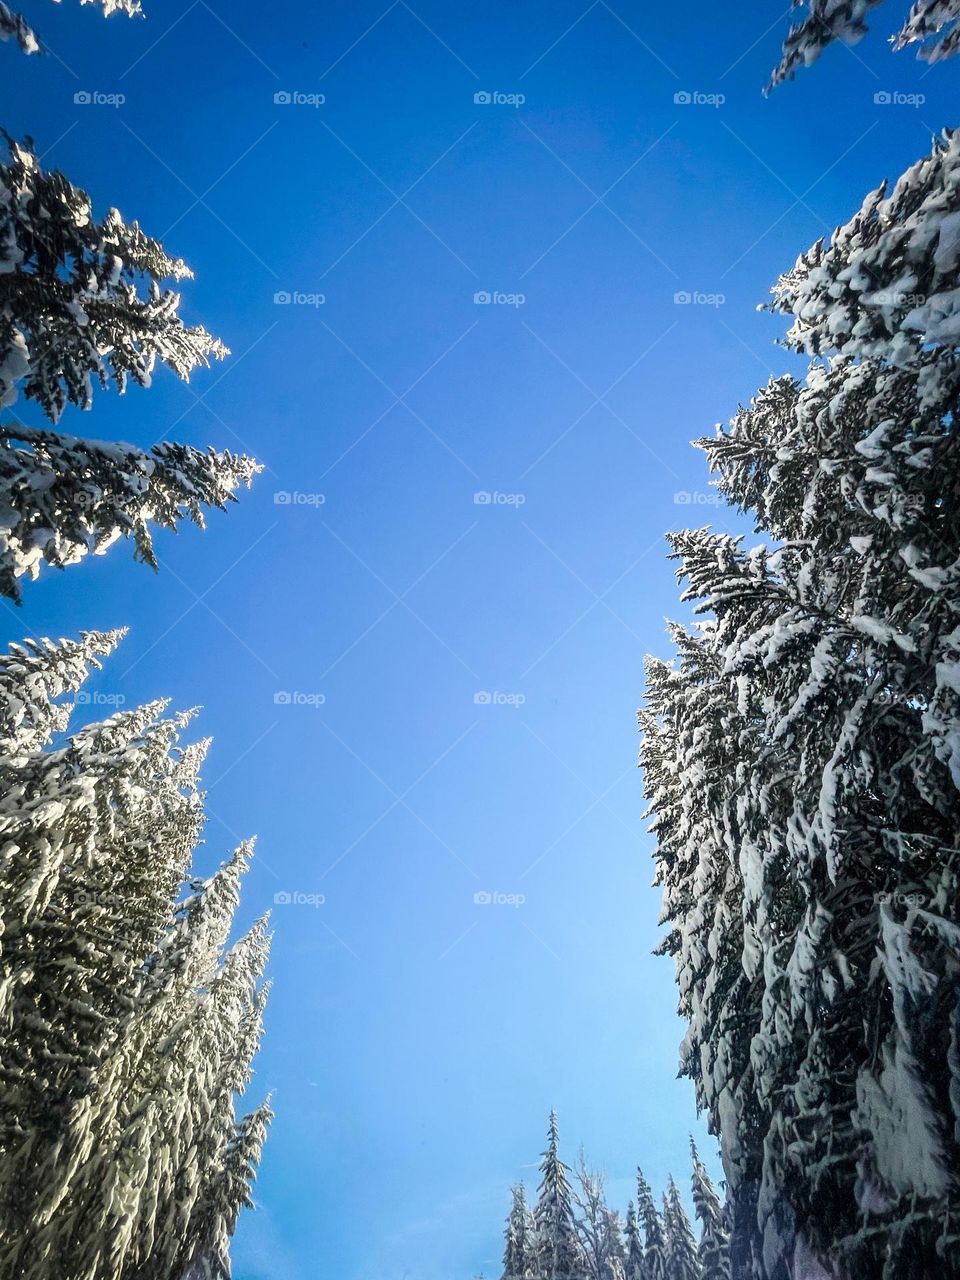 Snowy pine trees in the PNW 